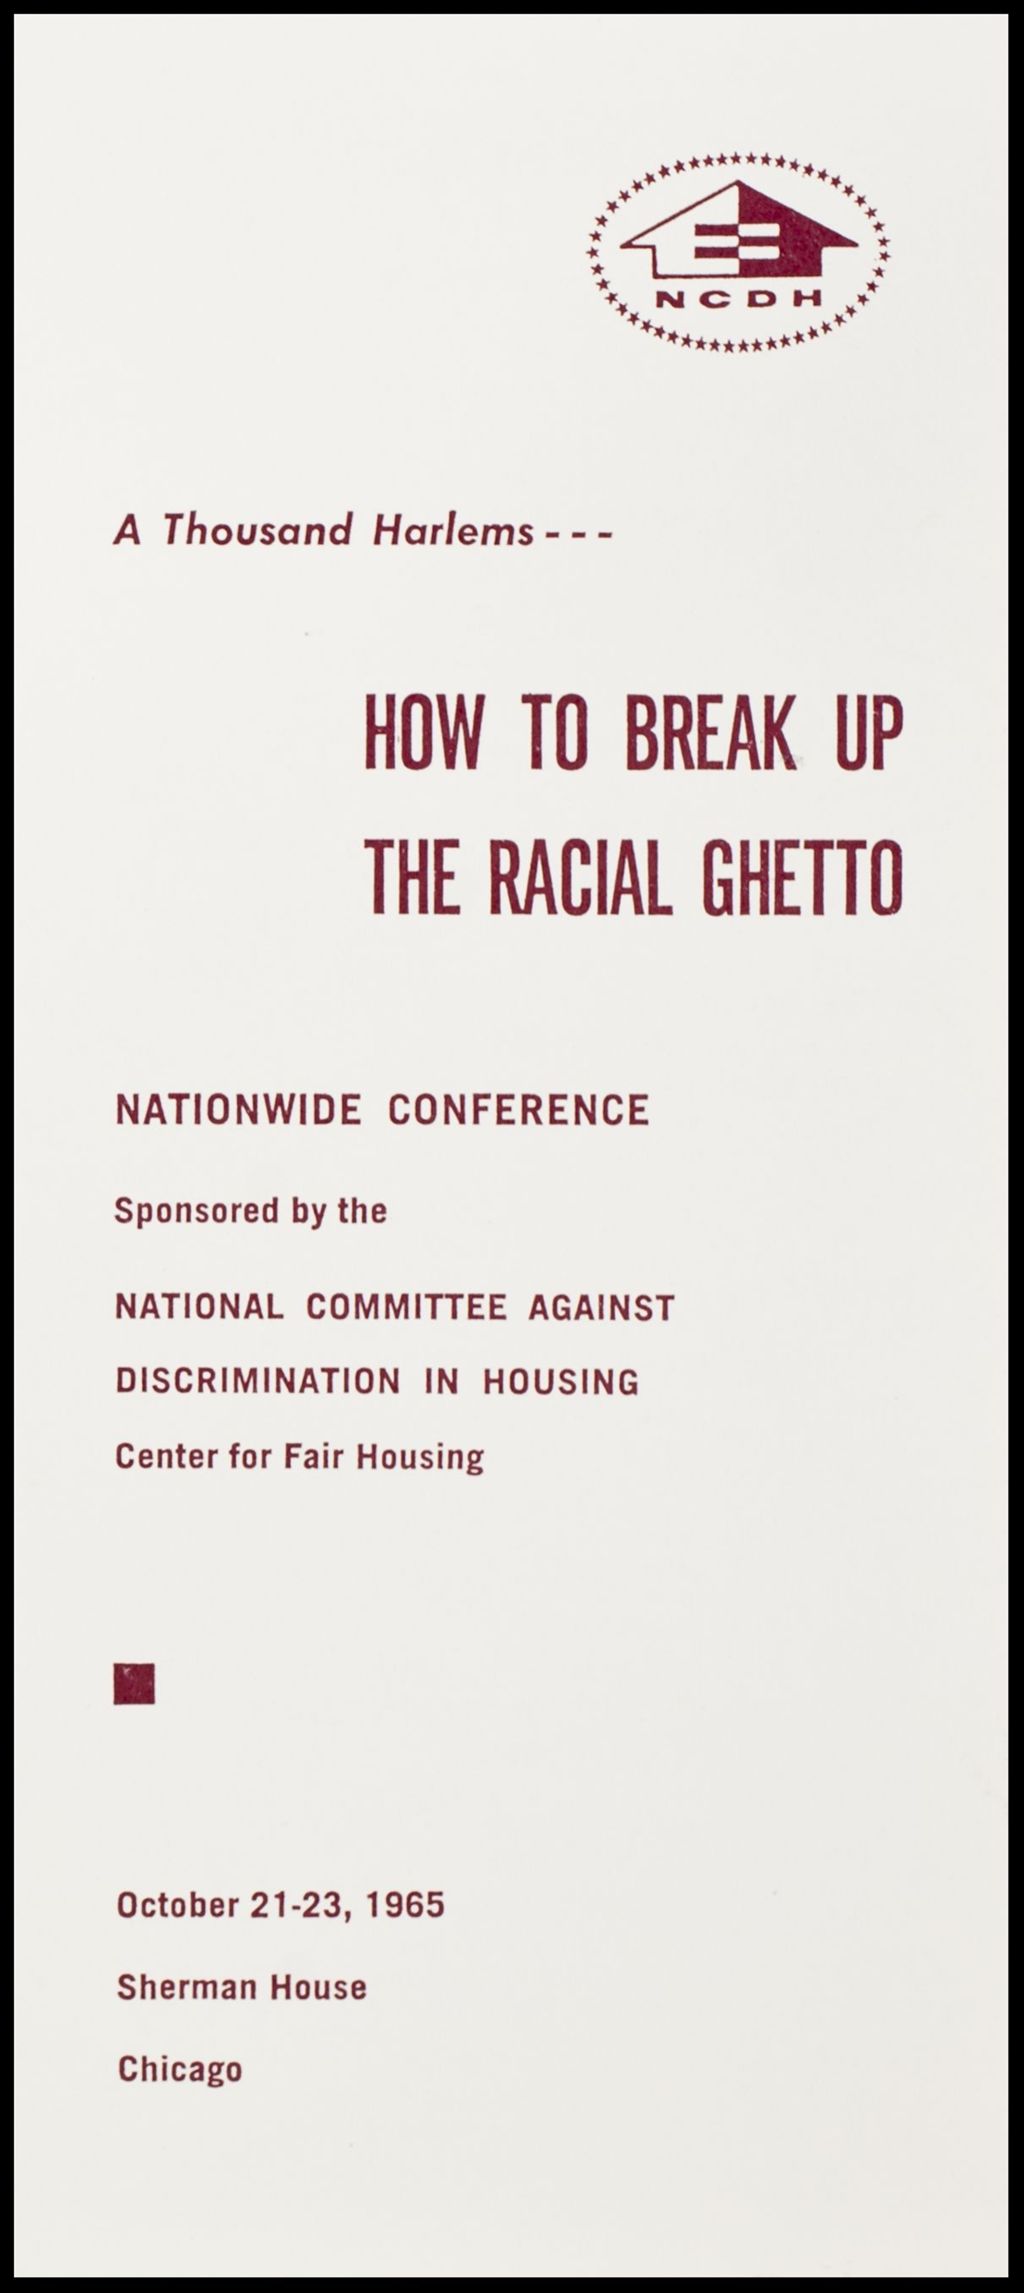 National Committee Against Discrimination in Housing, 1965 (Folder IV-1119)